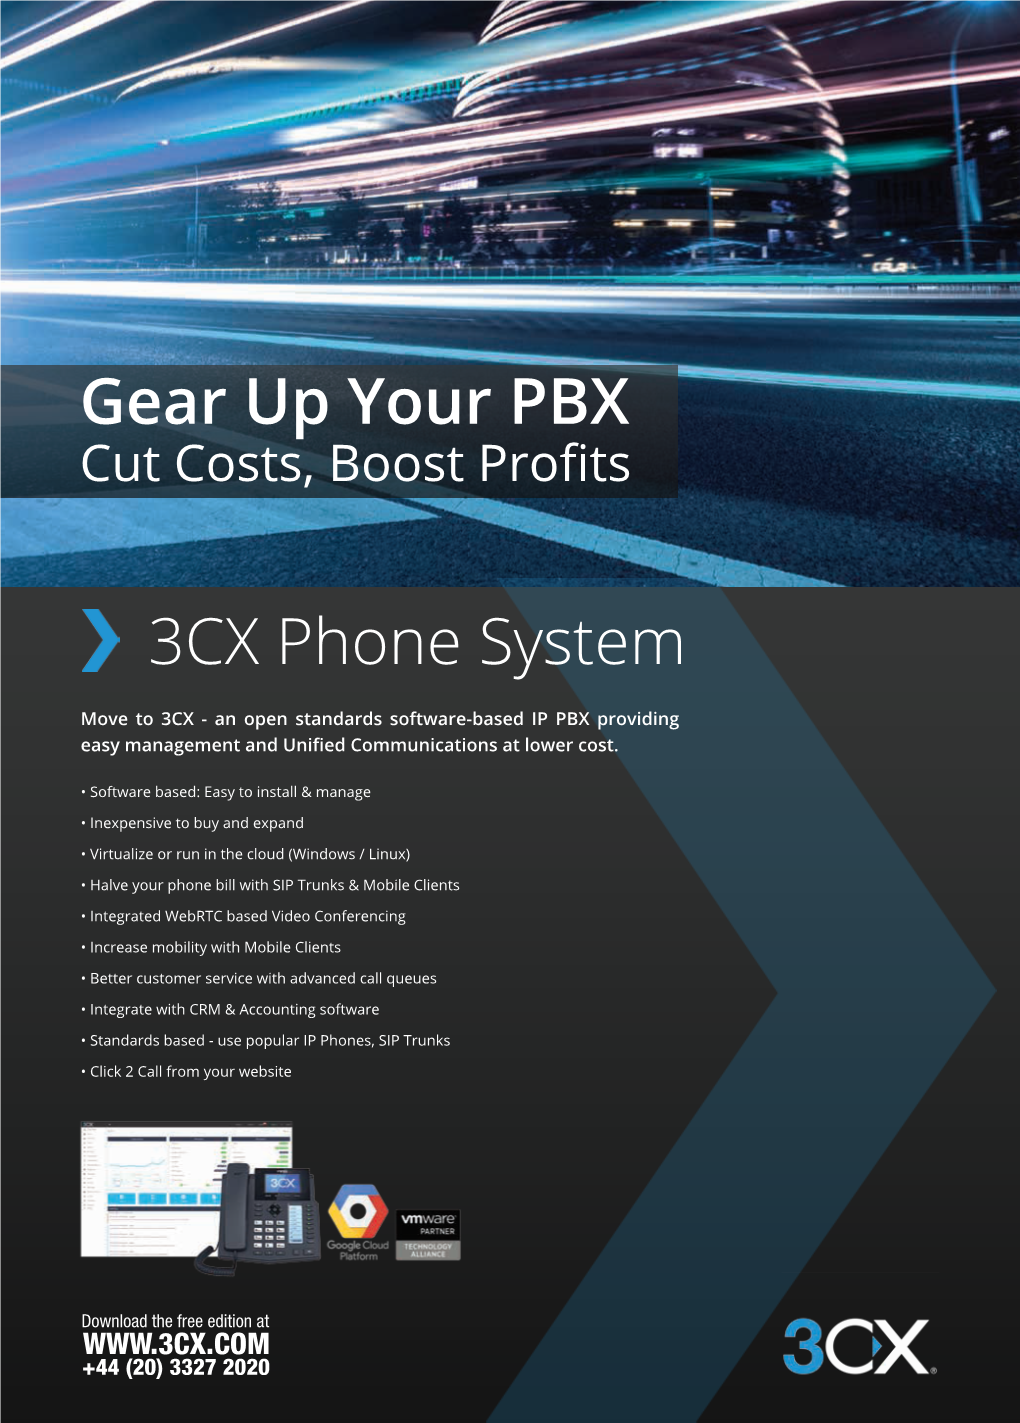 3CX Phone System Gear up Your